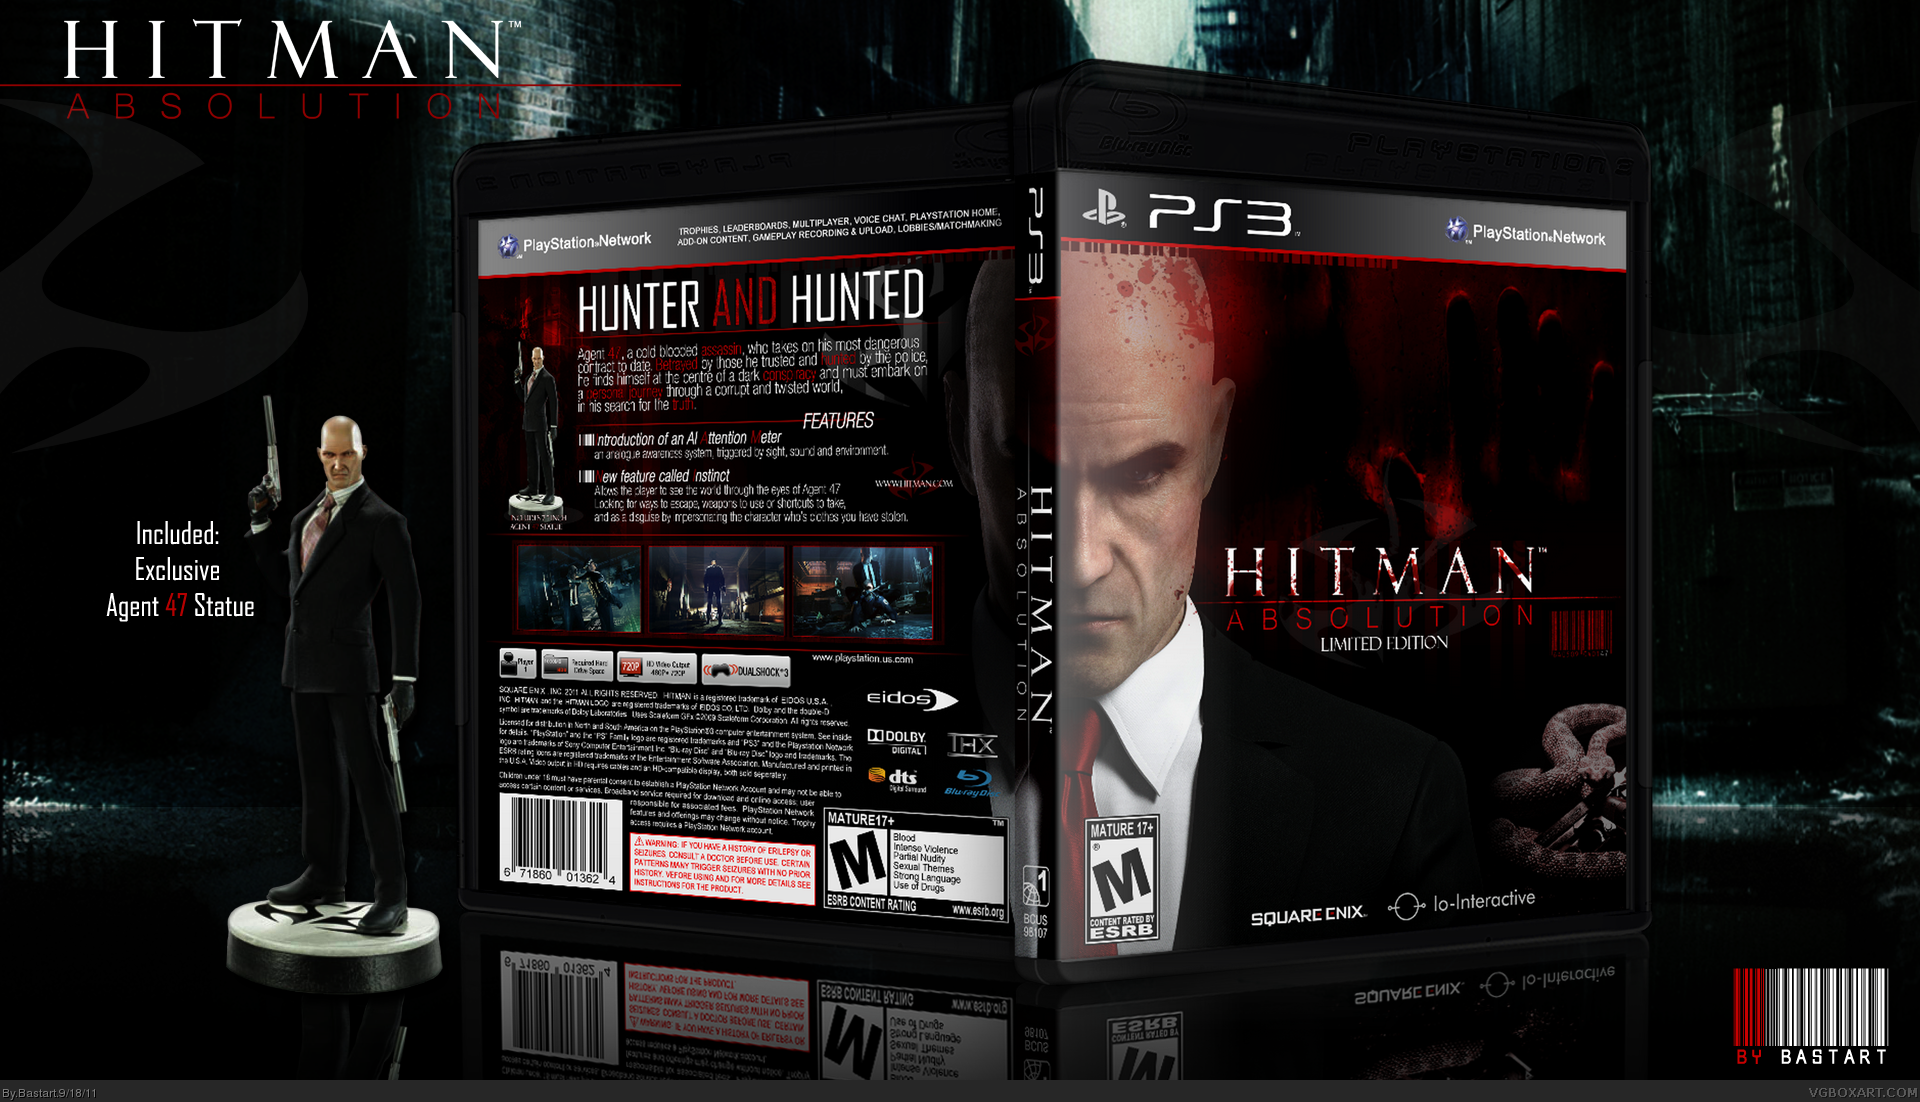 Hitman Absolution: Limited Edition box cover